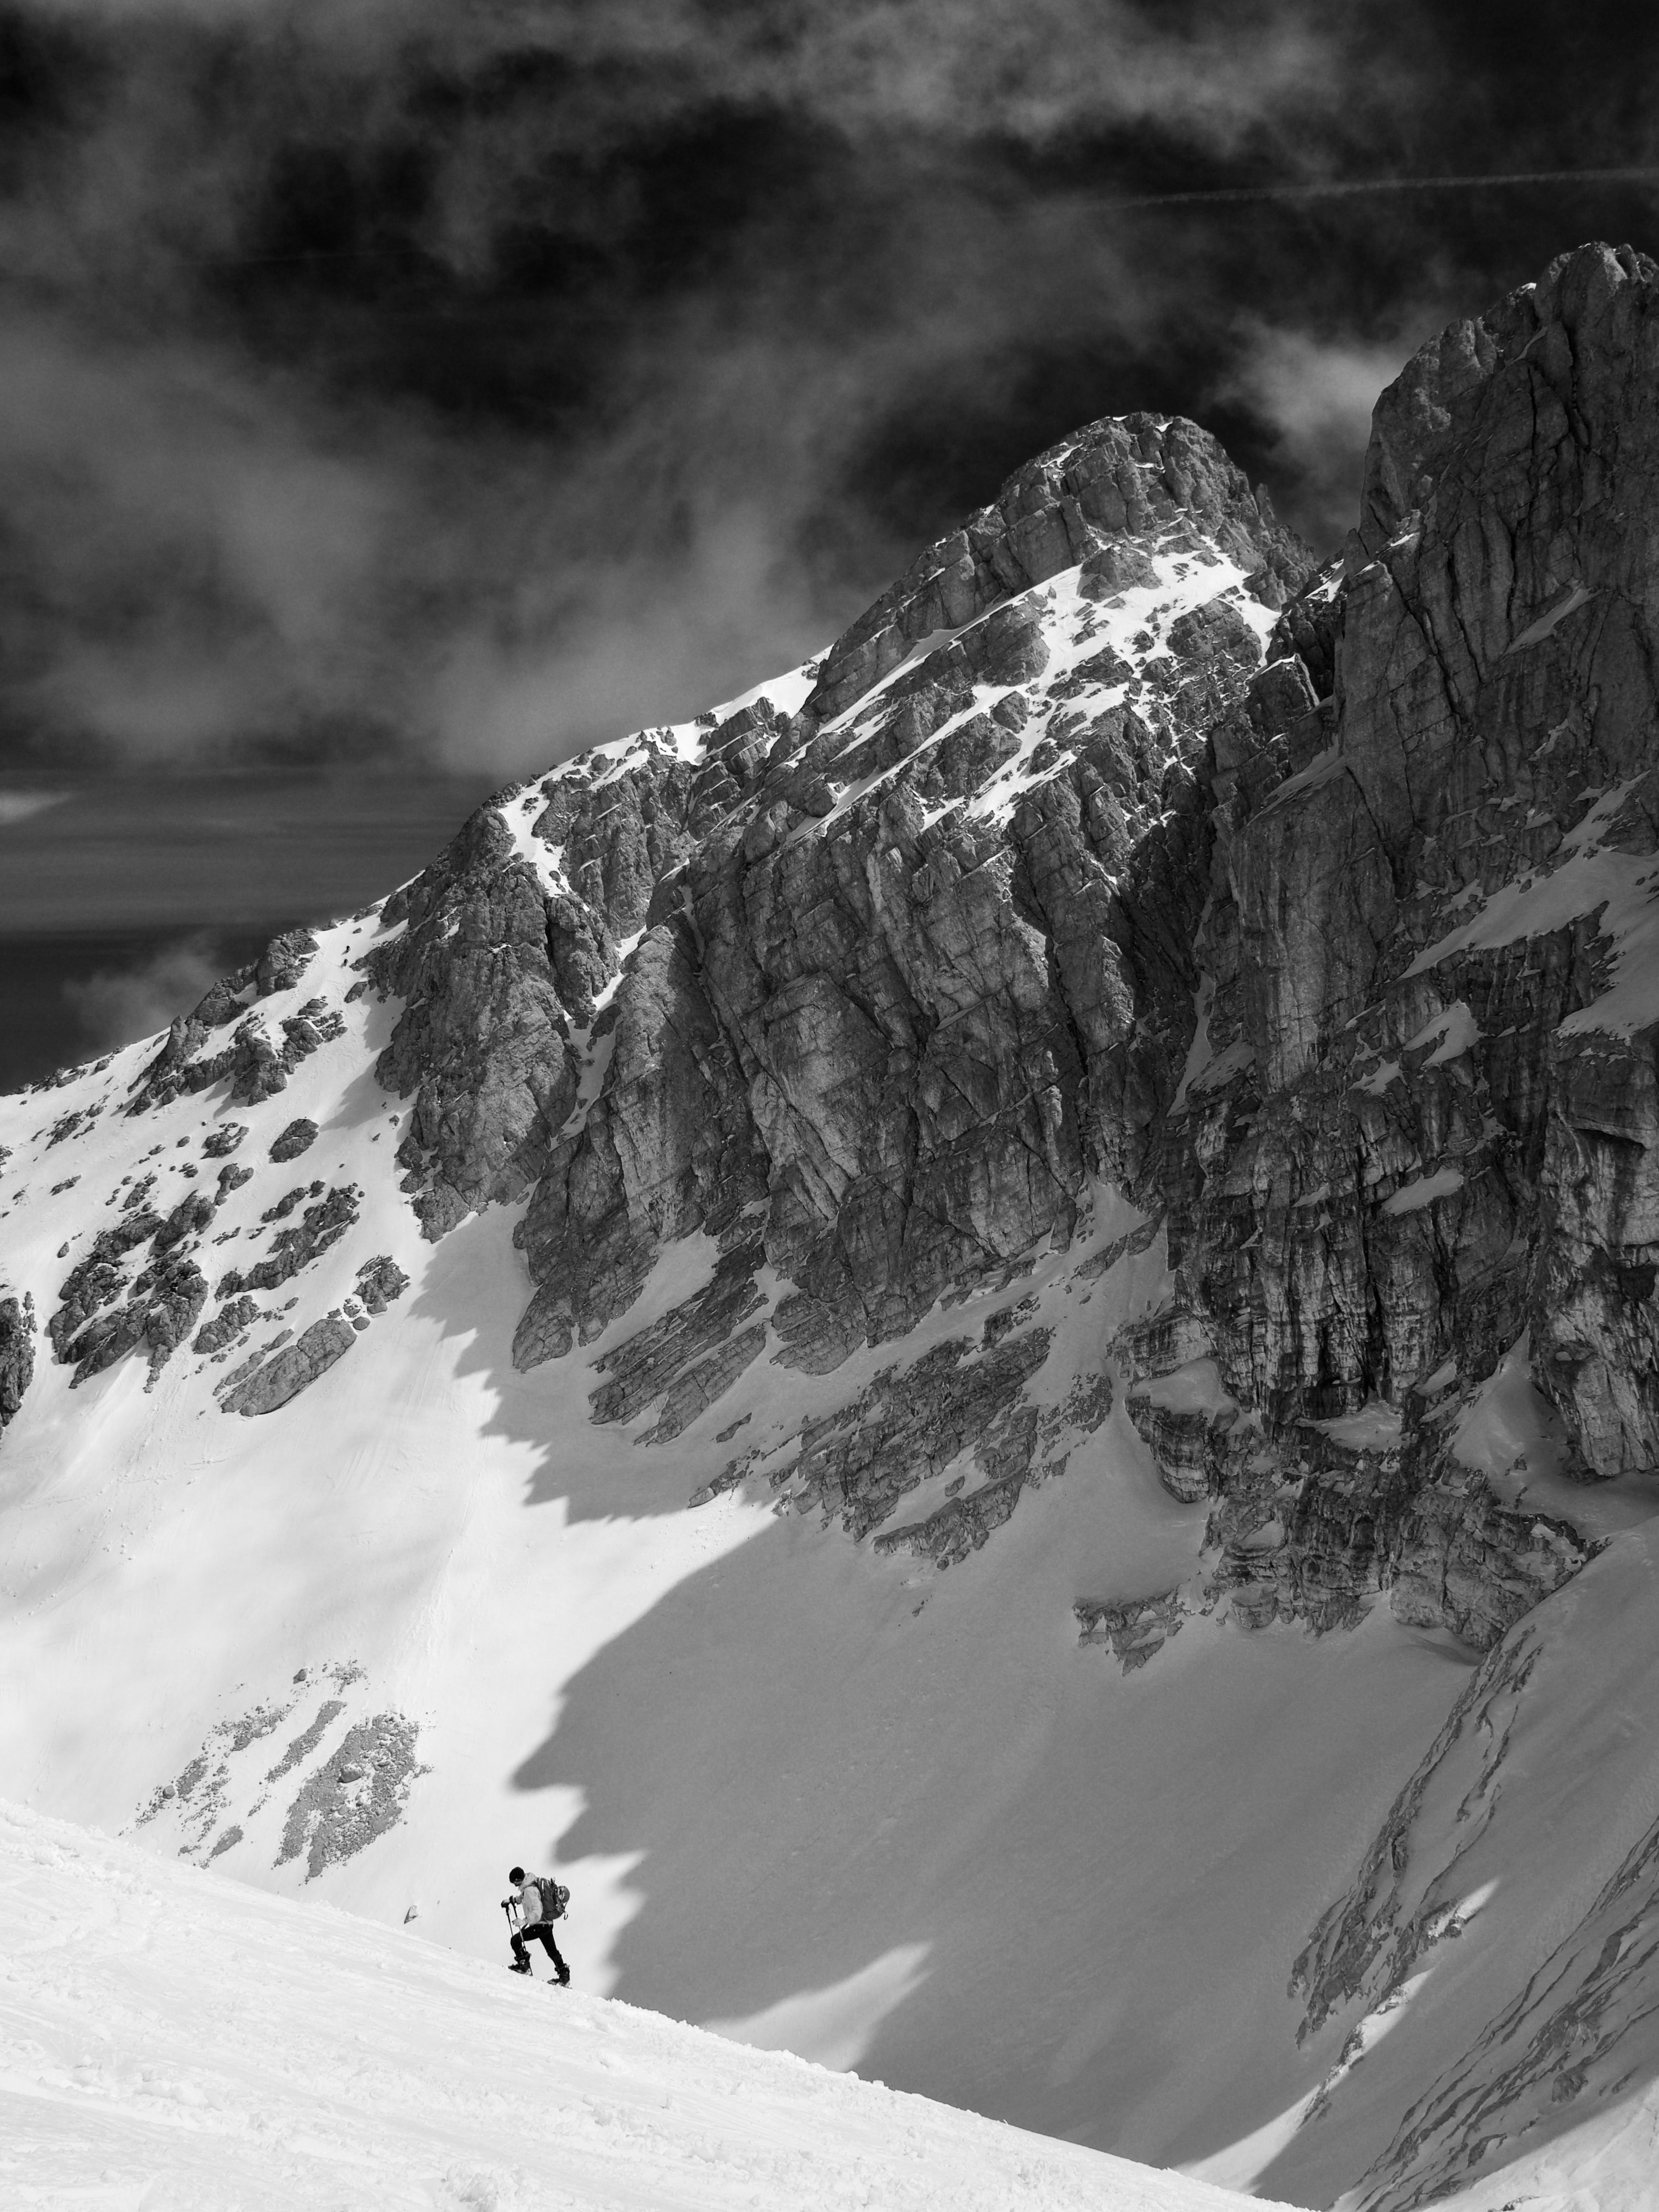 mountaineer, mountains, bw, landscape, nature, snow, chb, climber